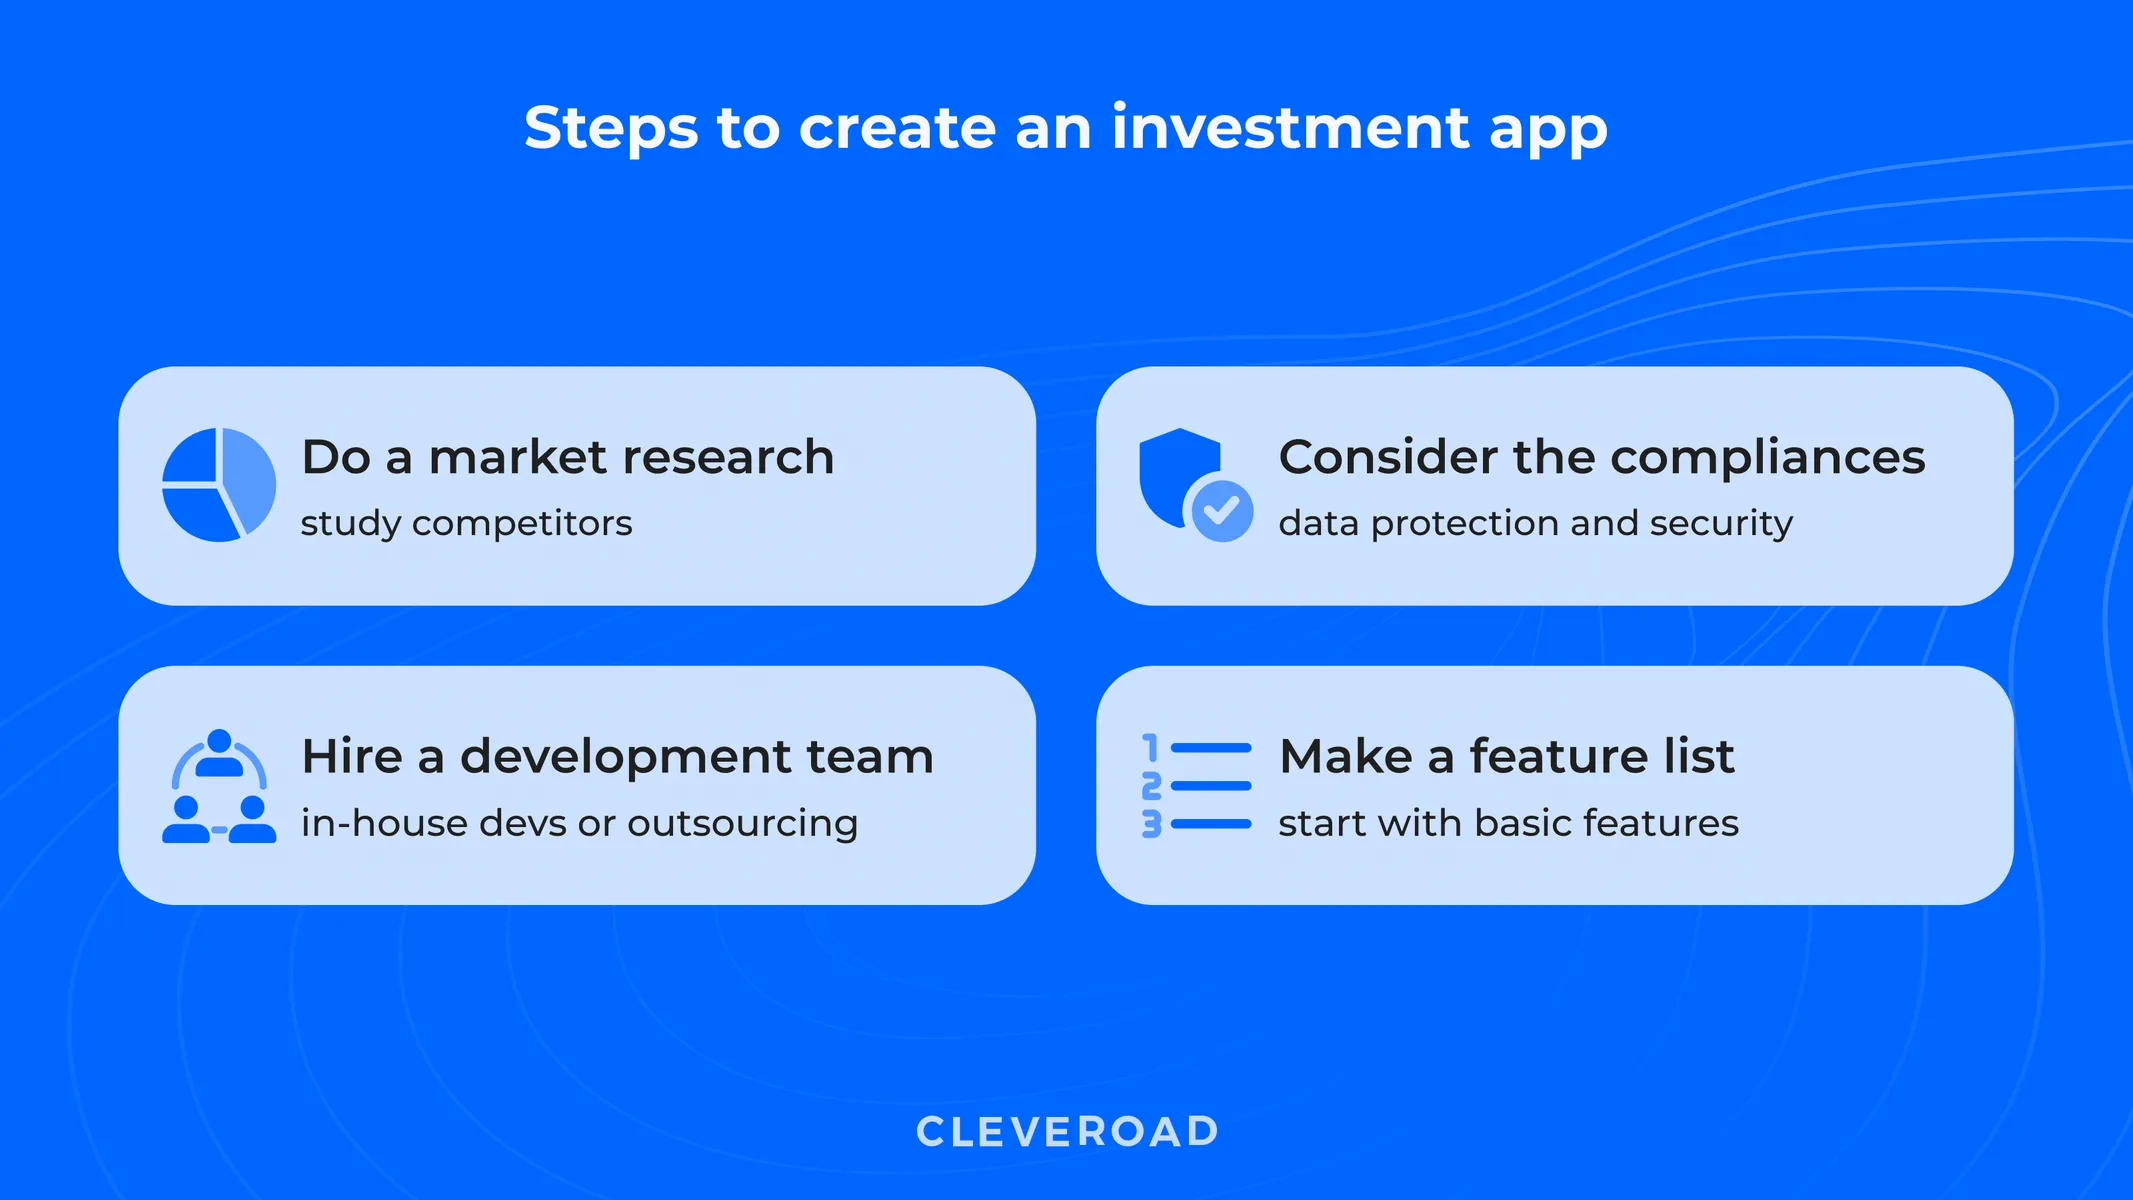 How to create an investment app